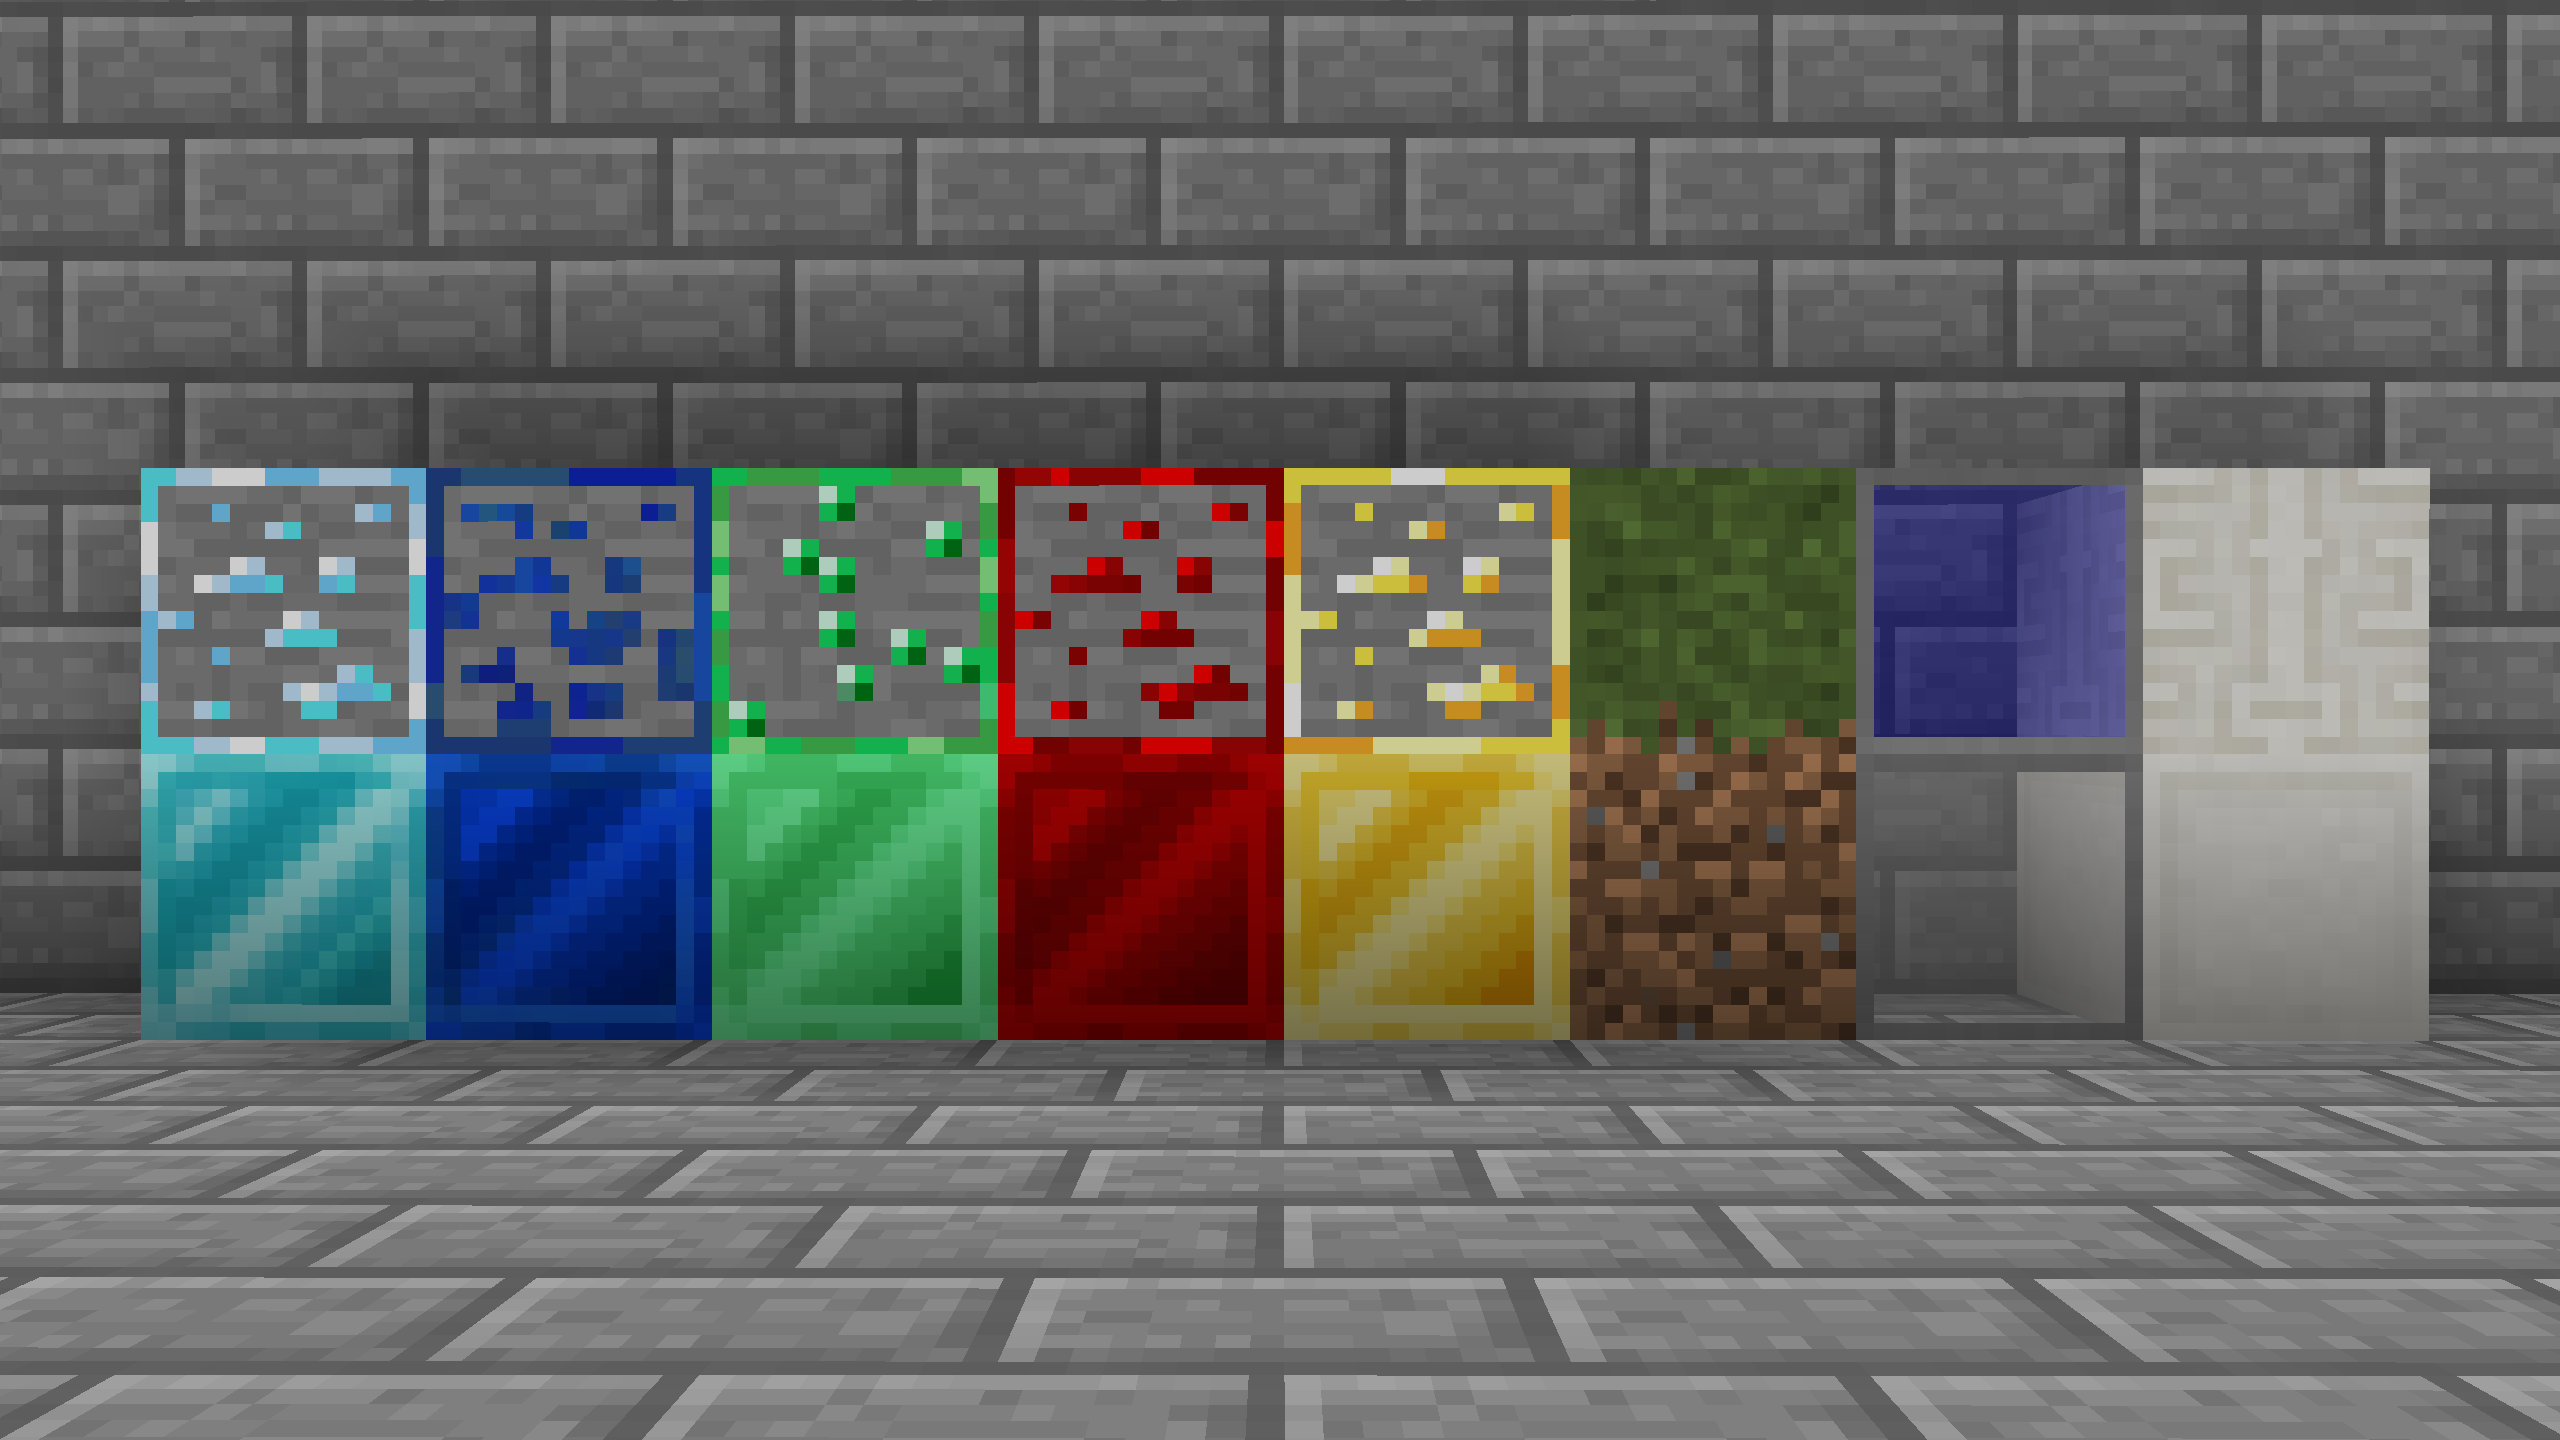 Some of the Block textures